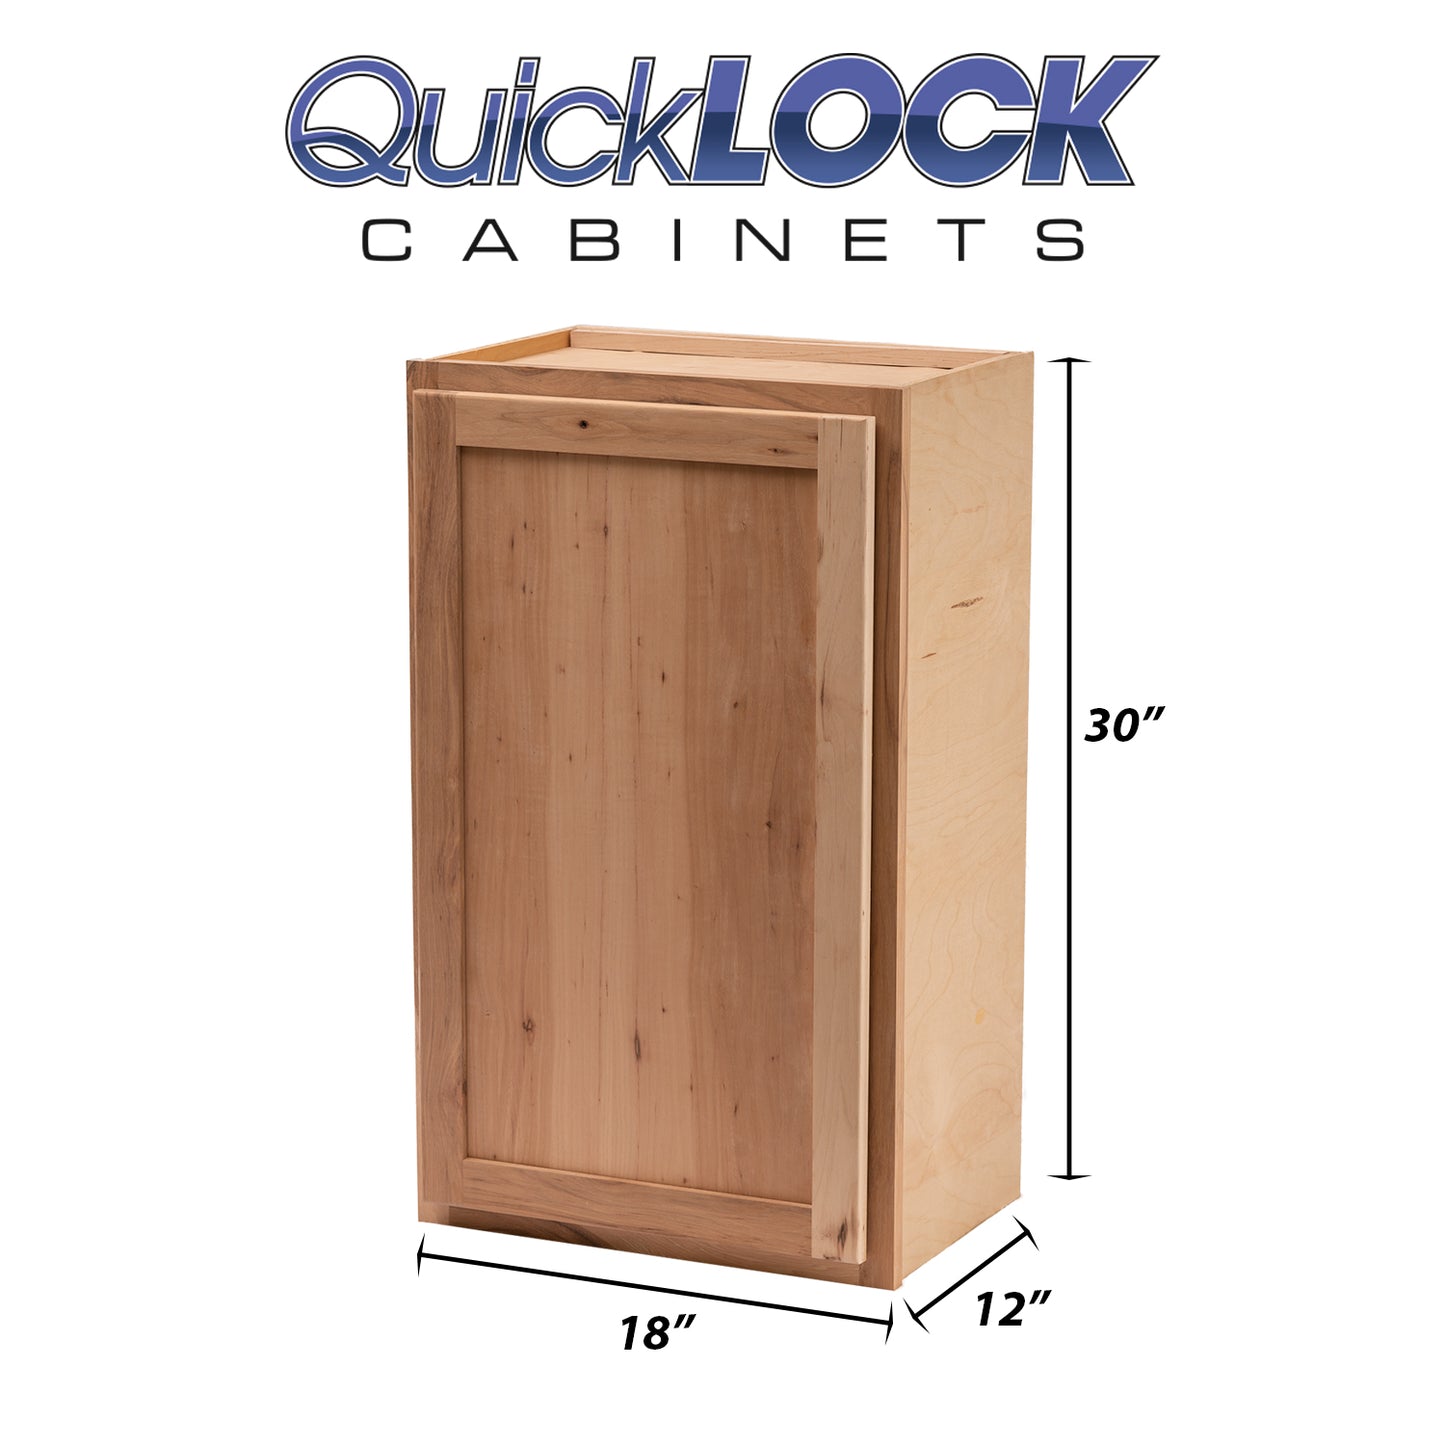 Quicklock RTA (Ready-to-Assemble) Raw Hickory 18"Wx30"Hx12"D Wall Cabinet